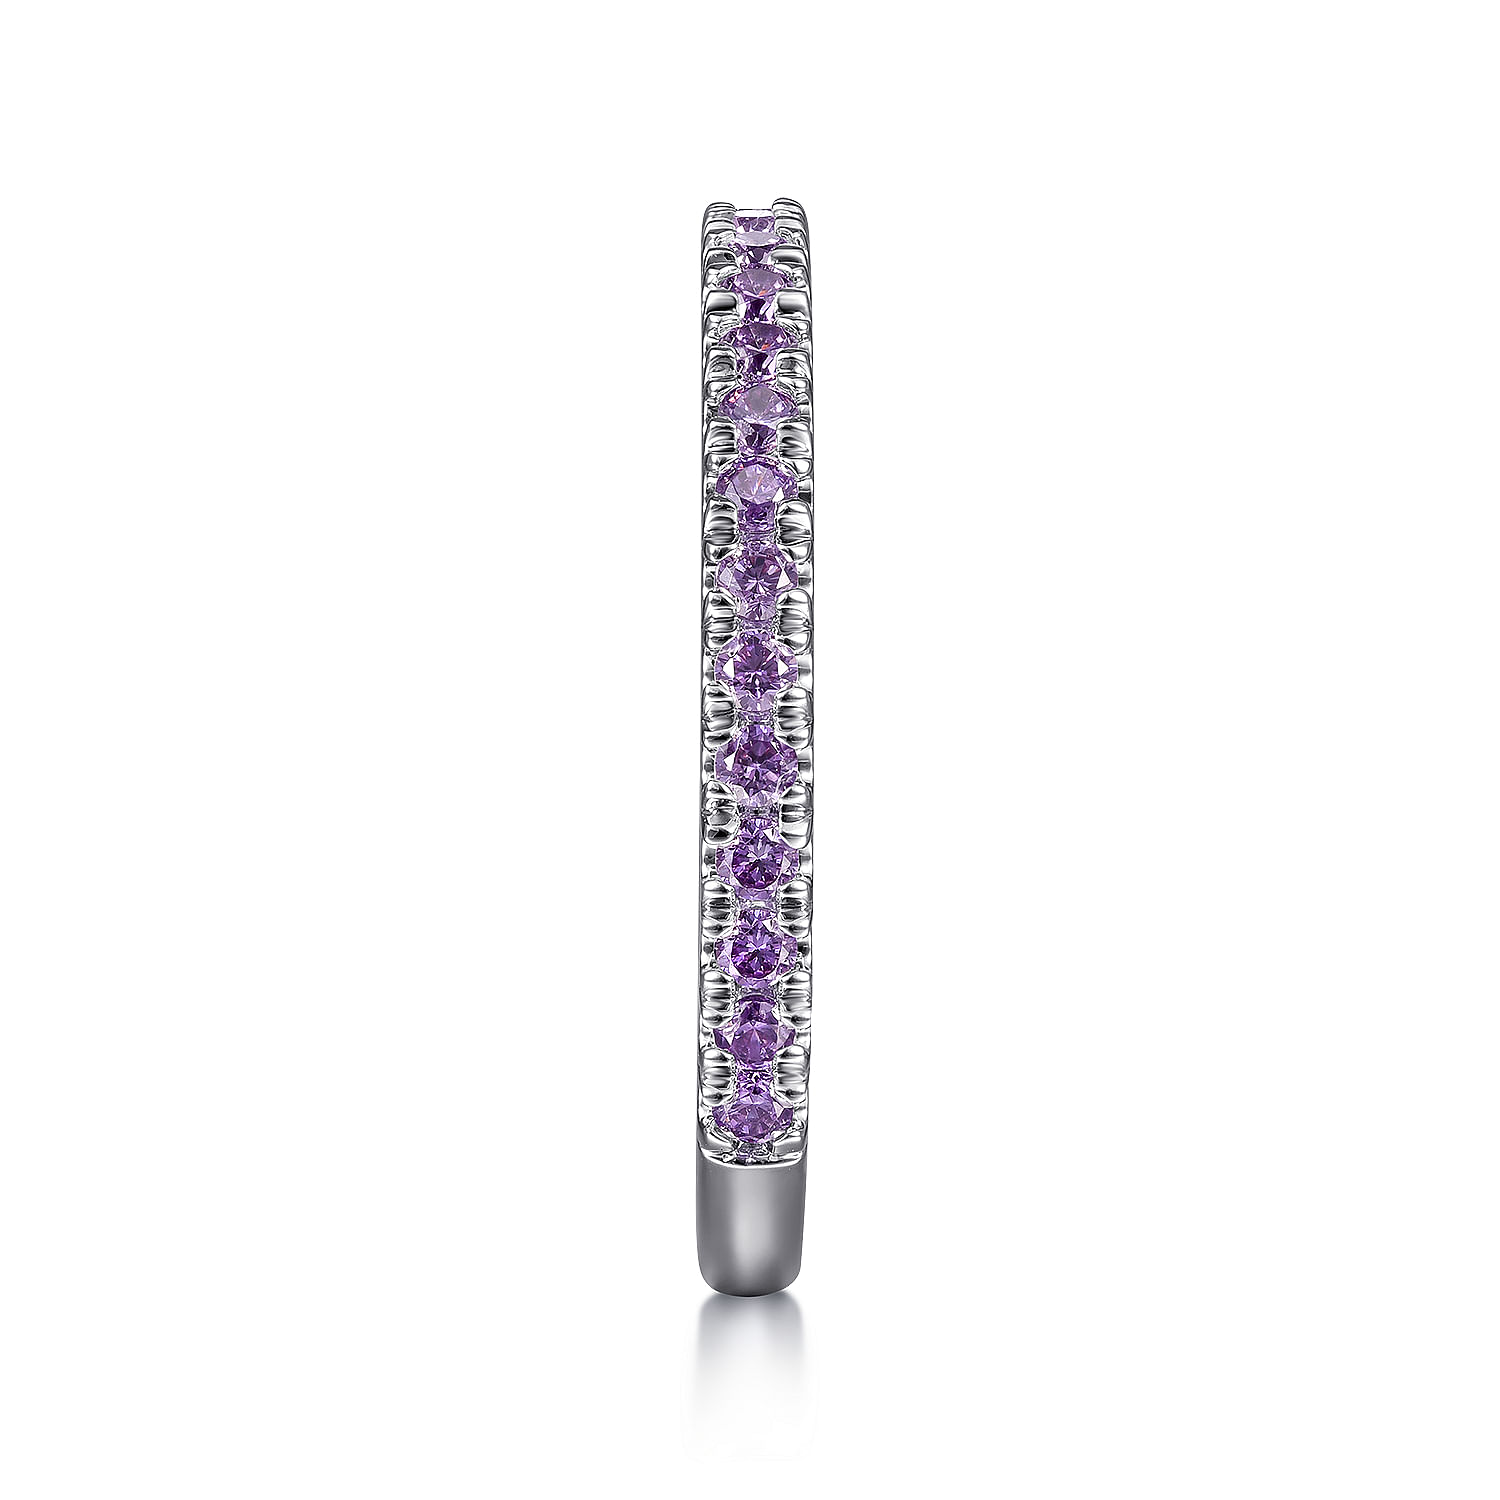 14K White Gold Amethyst Stackable Ring